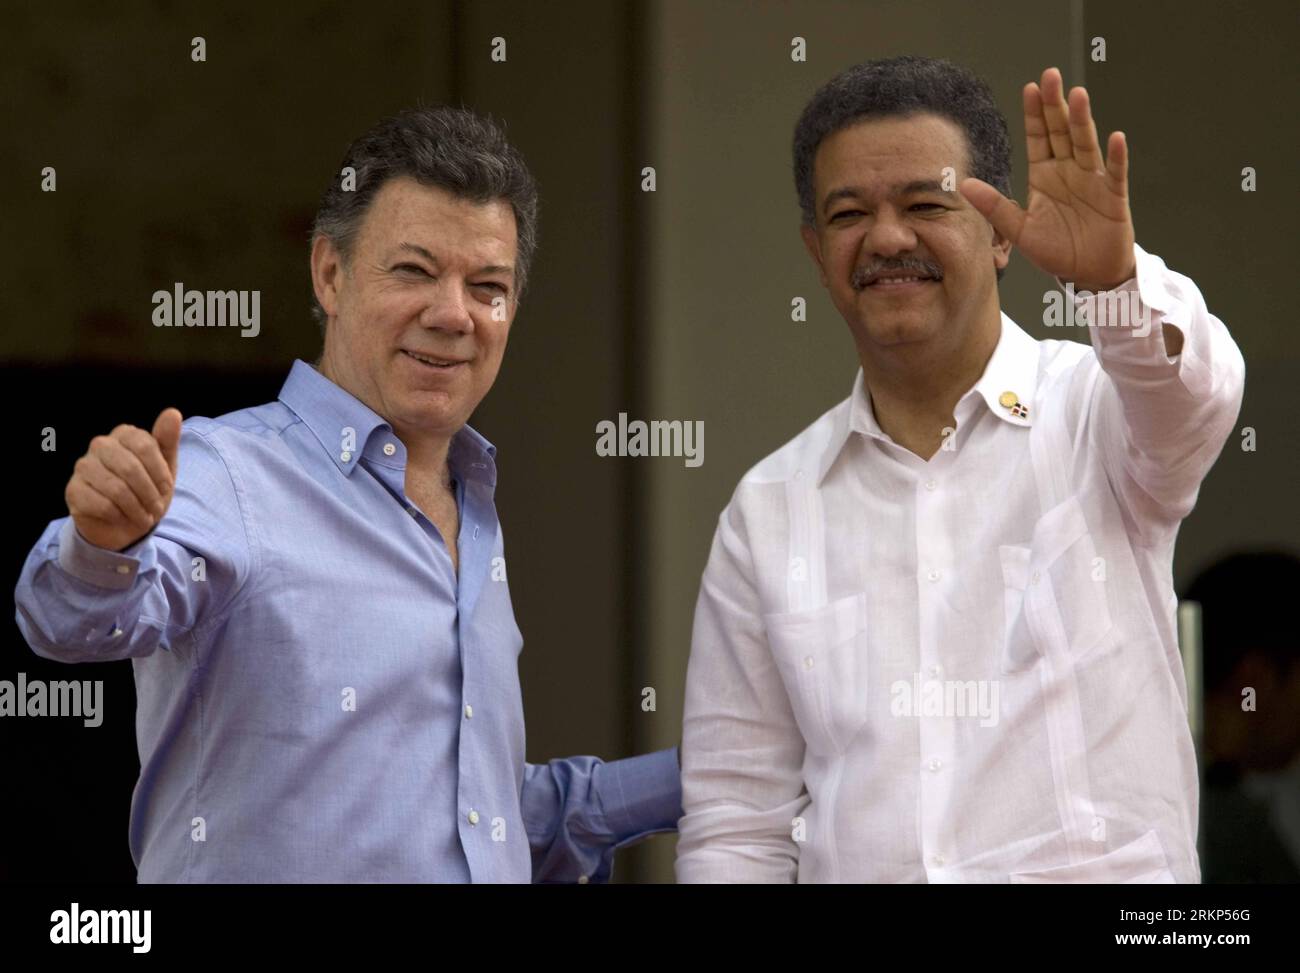 Bildnummer: 57896125  Datum: 14.04.2012  Copyright: imago/Xinhua (120414) -- CARTAGENA, April 14, 2012 (Xinhua) -- Dominican Republic President Leonel Fernandez (R) is welcomed by Colombian President Juan Manuel Santos before the opening ceremony of the Sixth Summit of the Americas in Cartagena, Colombia, April 14, 2012. The Sixth Summit of the Americas, a gathering of heads of state and government from the Western Hemisphere, opened in Colombia s Caribbean resort city of Cartagena on Saturday. (Xinhua/Eliana Aponte) COLOMBIA-CARTAGENA-SUMMIT OF THE AMERICAS-OPENING CEREMONY PUBLICATIONxNOTxIN Stock Photo